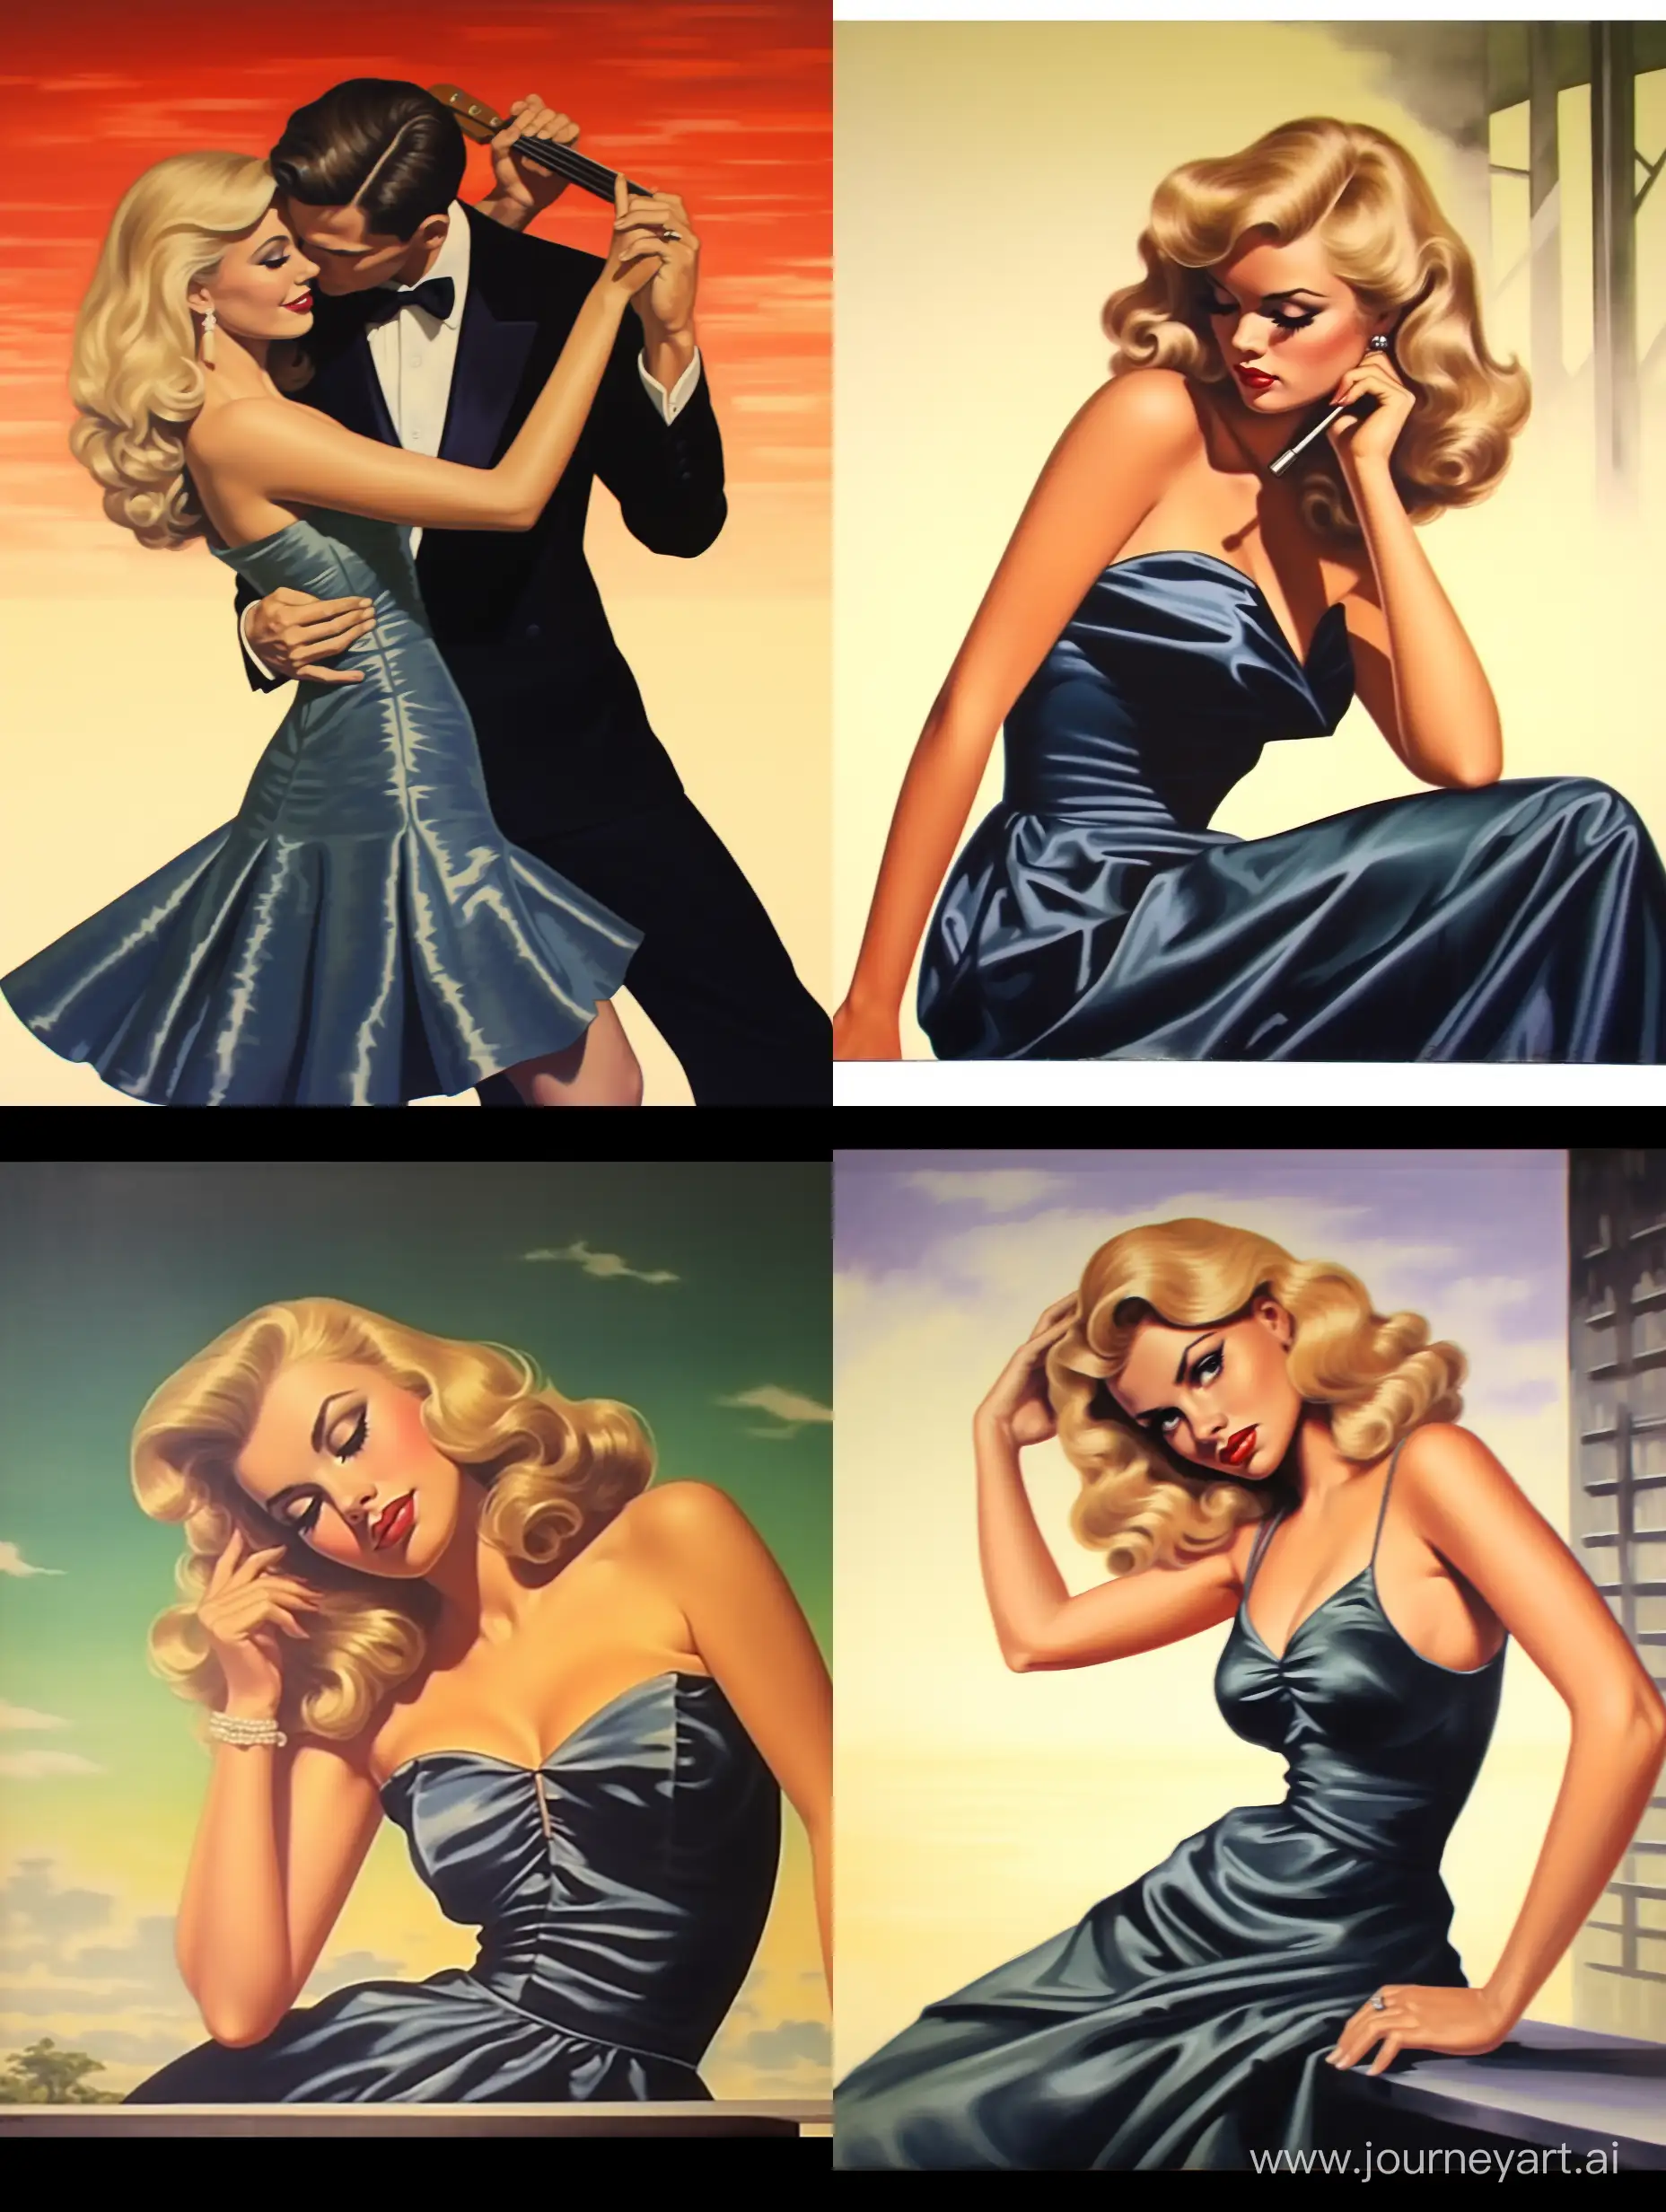 Robert Maguire style Pulp art of glamorous 1940s pretty long-haired blonde pinup girl wearing vintage lingerie